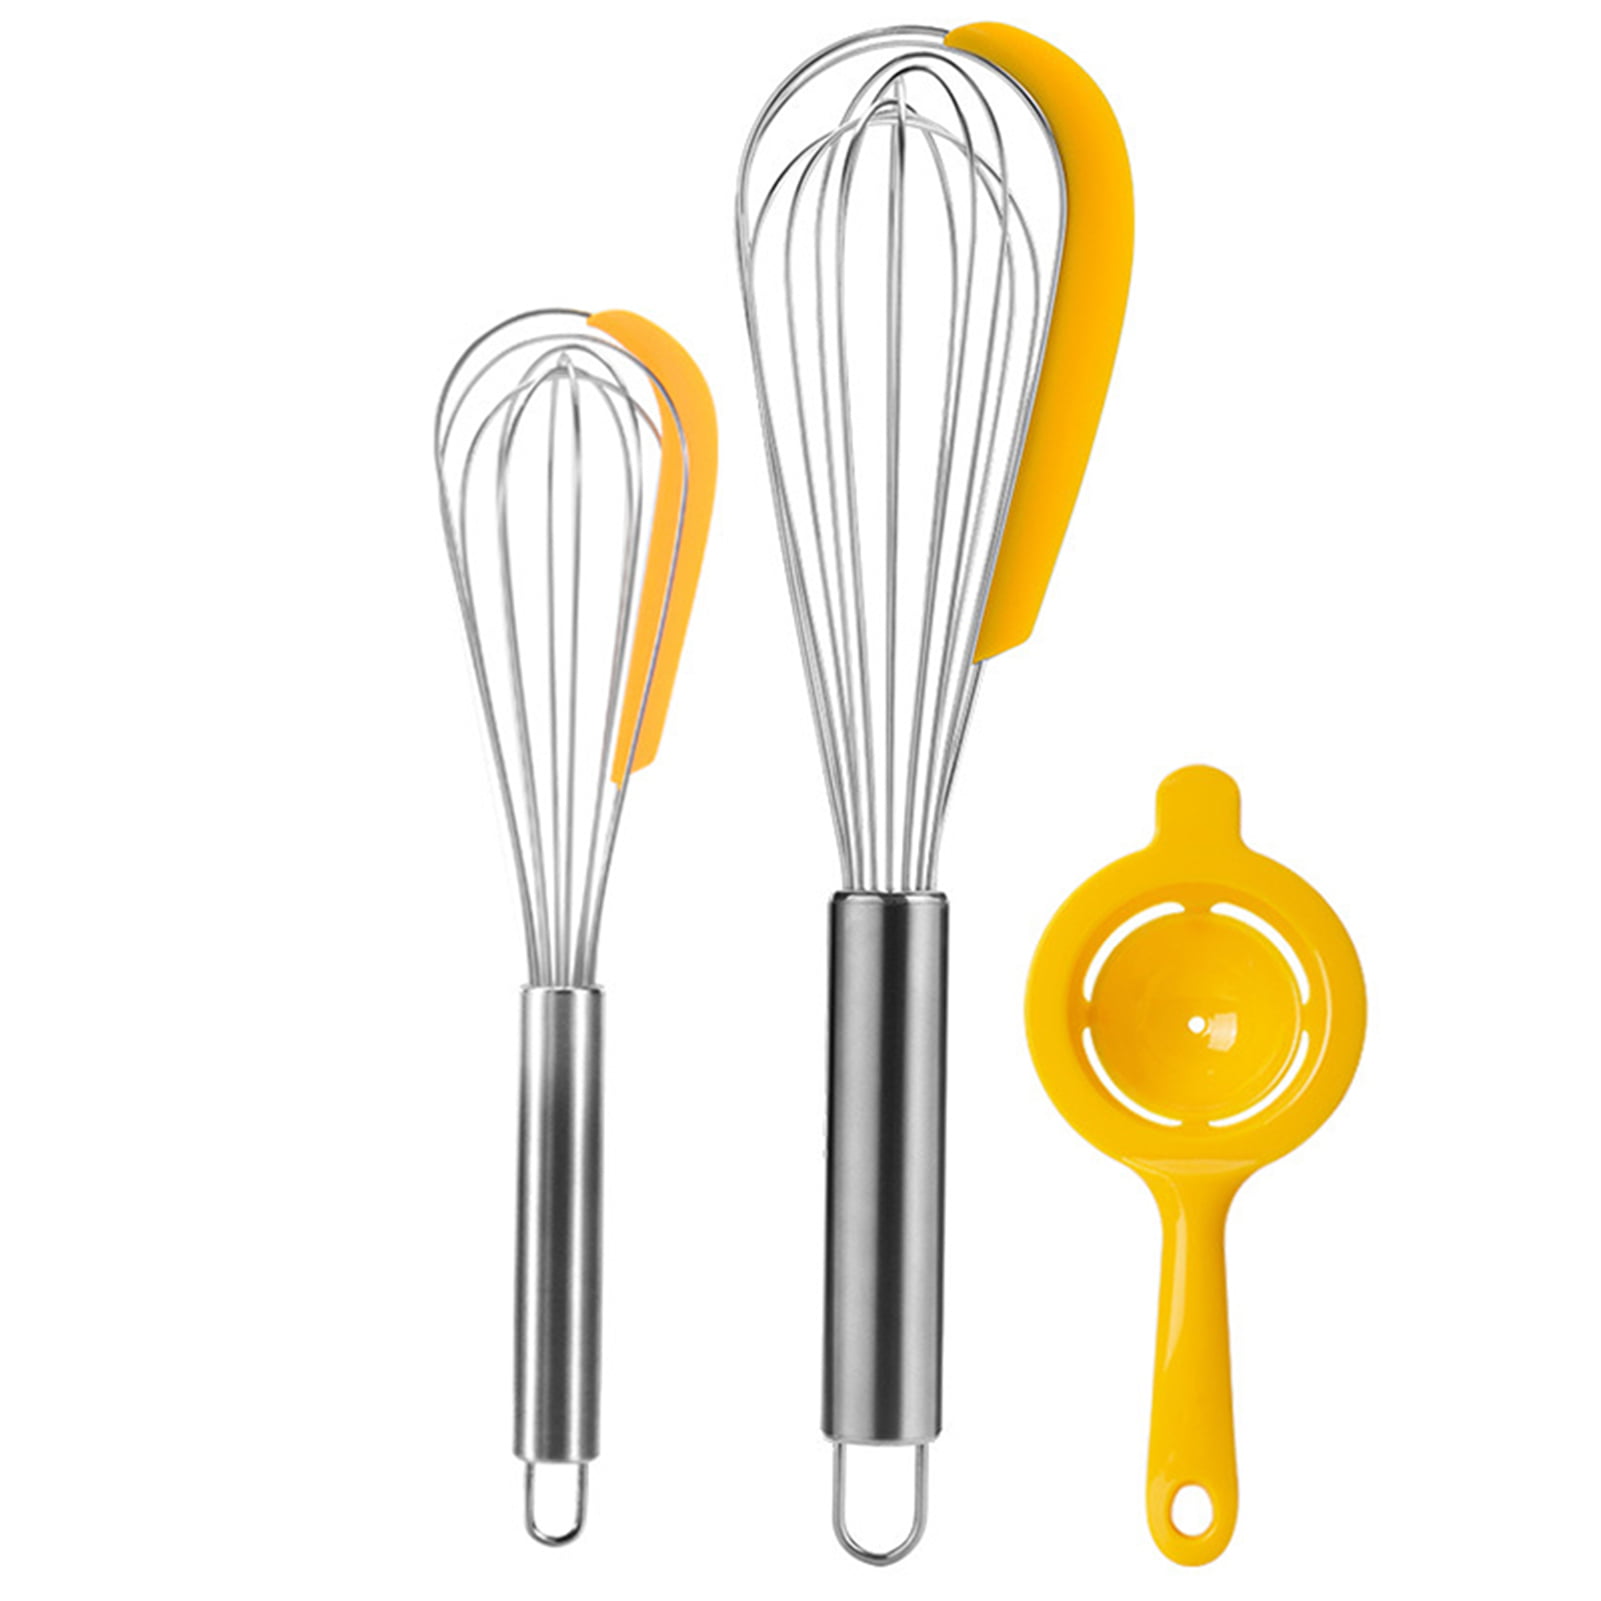 Stainless Steel Handle Silicone Whisk Wire Egg Beater Mixer Kitchen Tool NEW  bd 